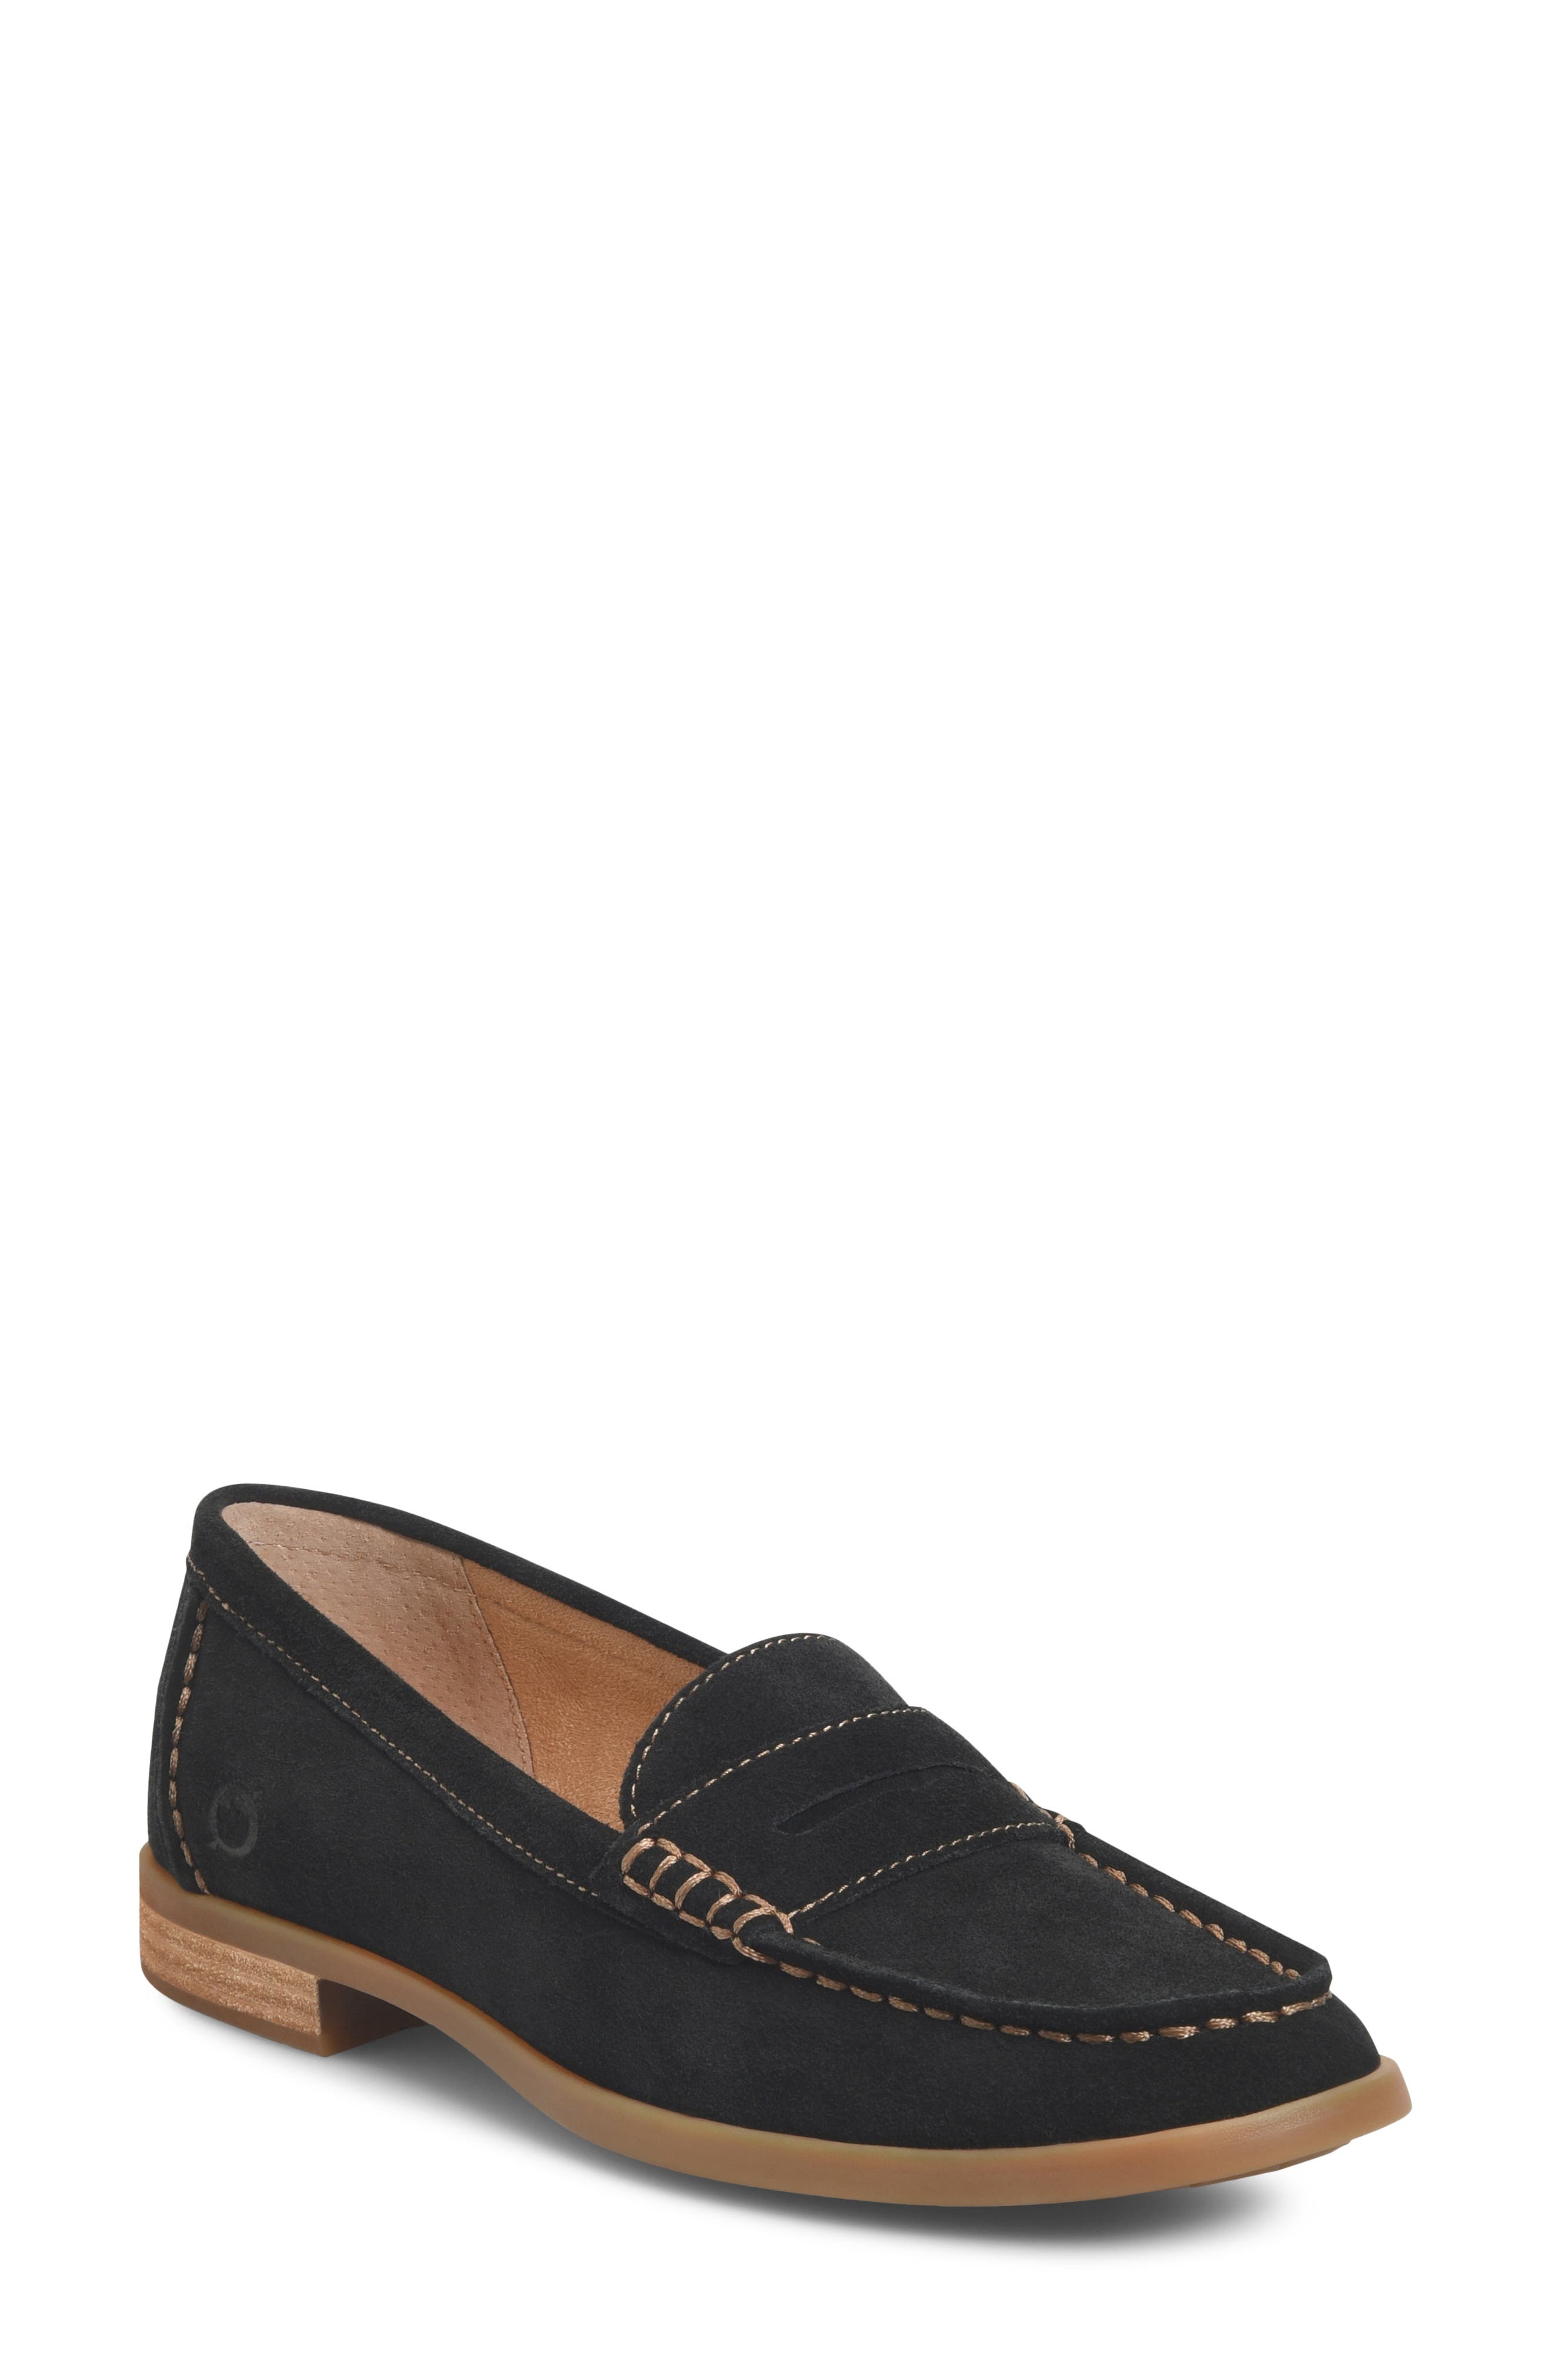 Women's Arch Support Loafers \u0026 Oxfords 